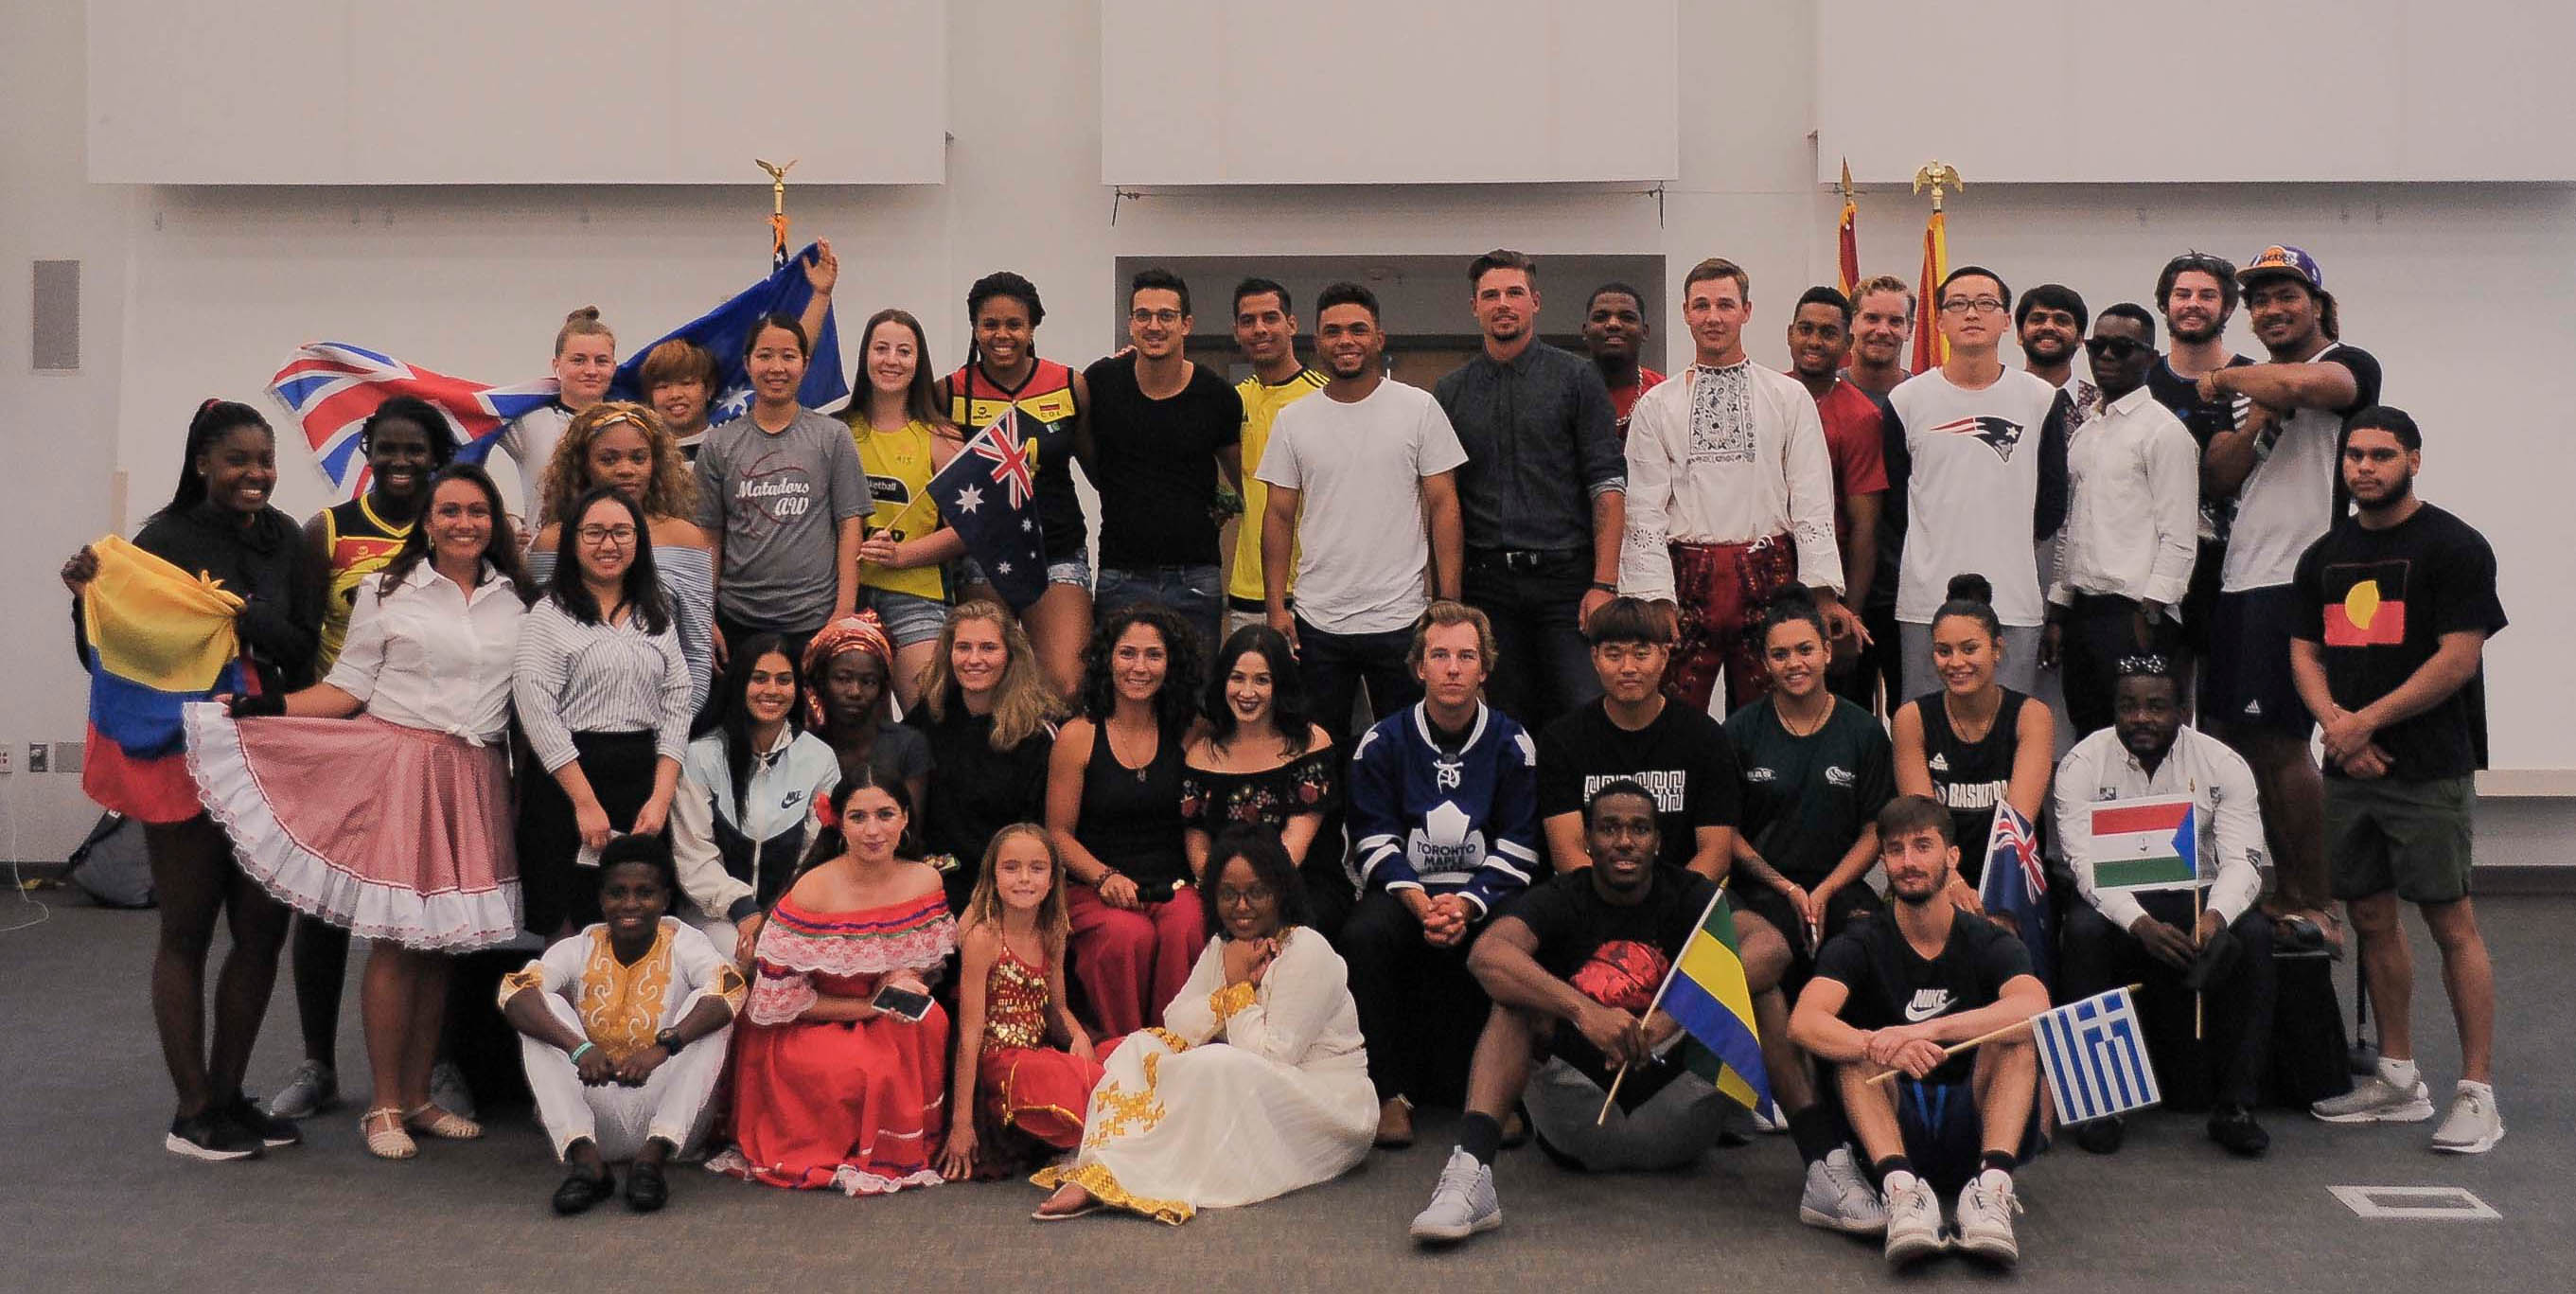 Large group of participants in various outfits from different cultures